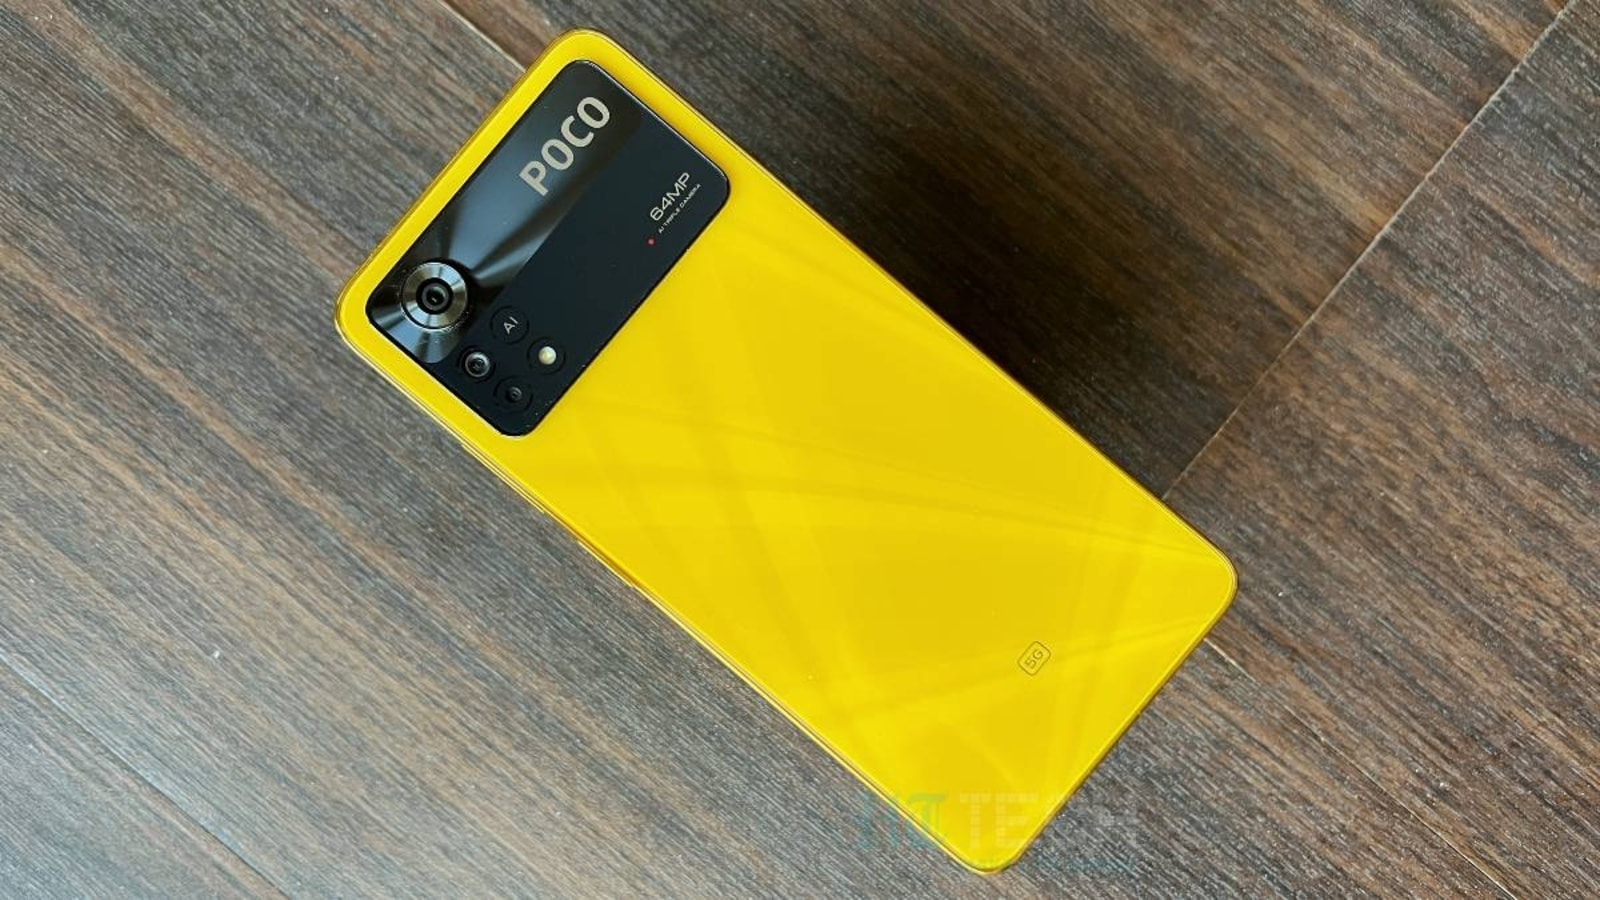 Poco X4 Pro review: Super value for money, but does it beat the X3 Pro?